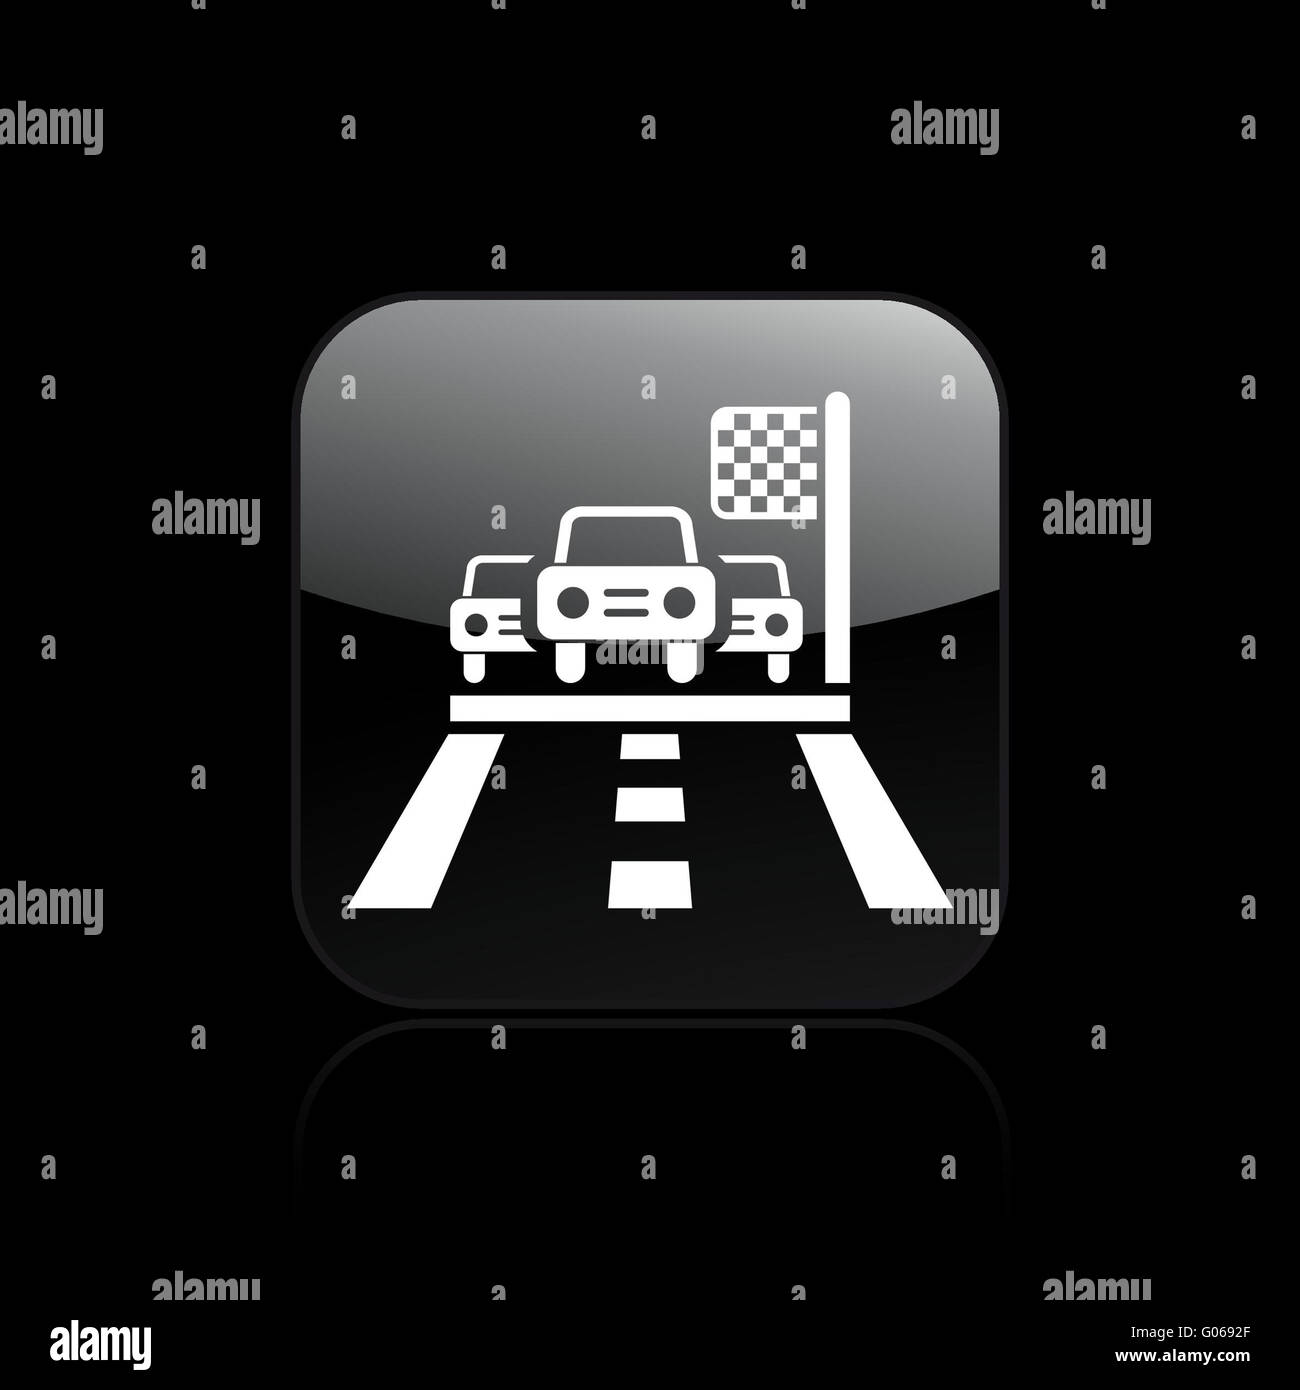 Vector illustration of isolated race arrival icon Stock Photo